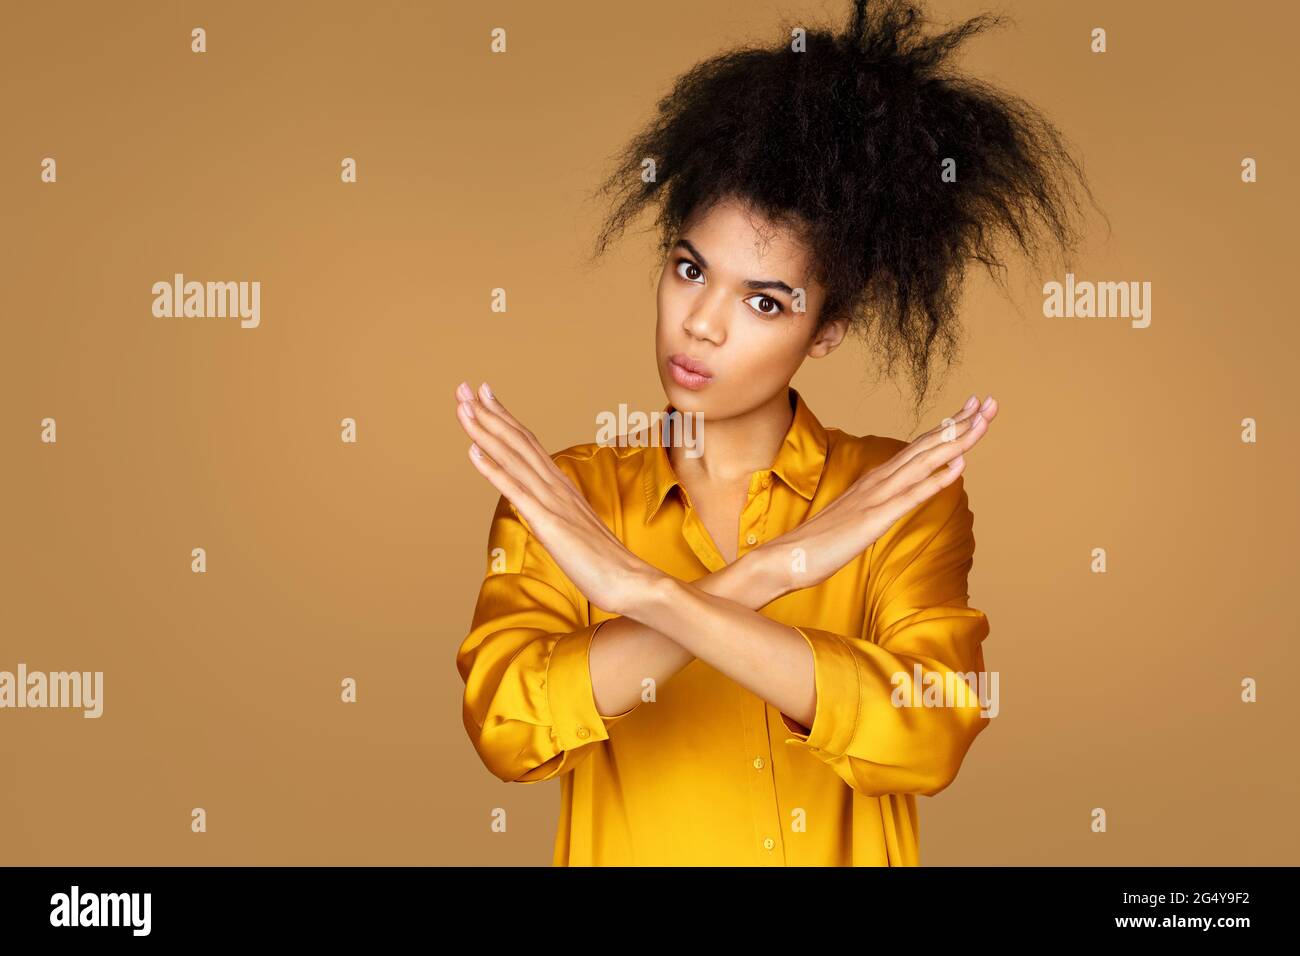 Girl raises arms in no or stop gesture. Photo of african american girl on beige background Stock Photo